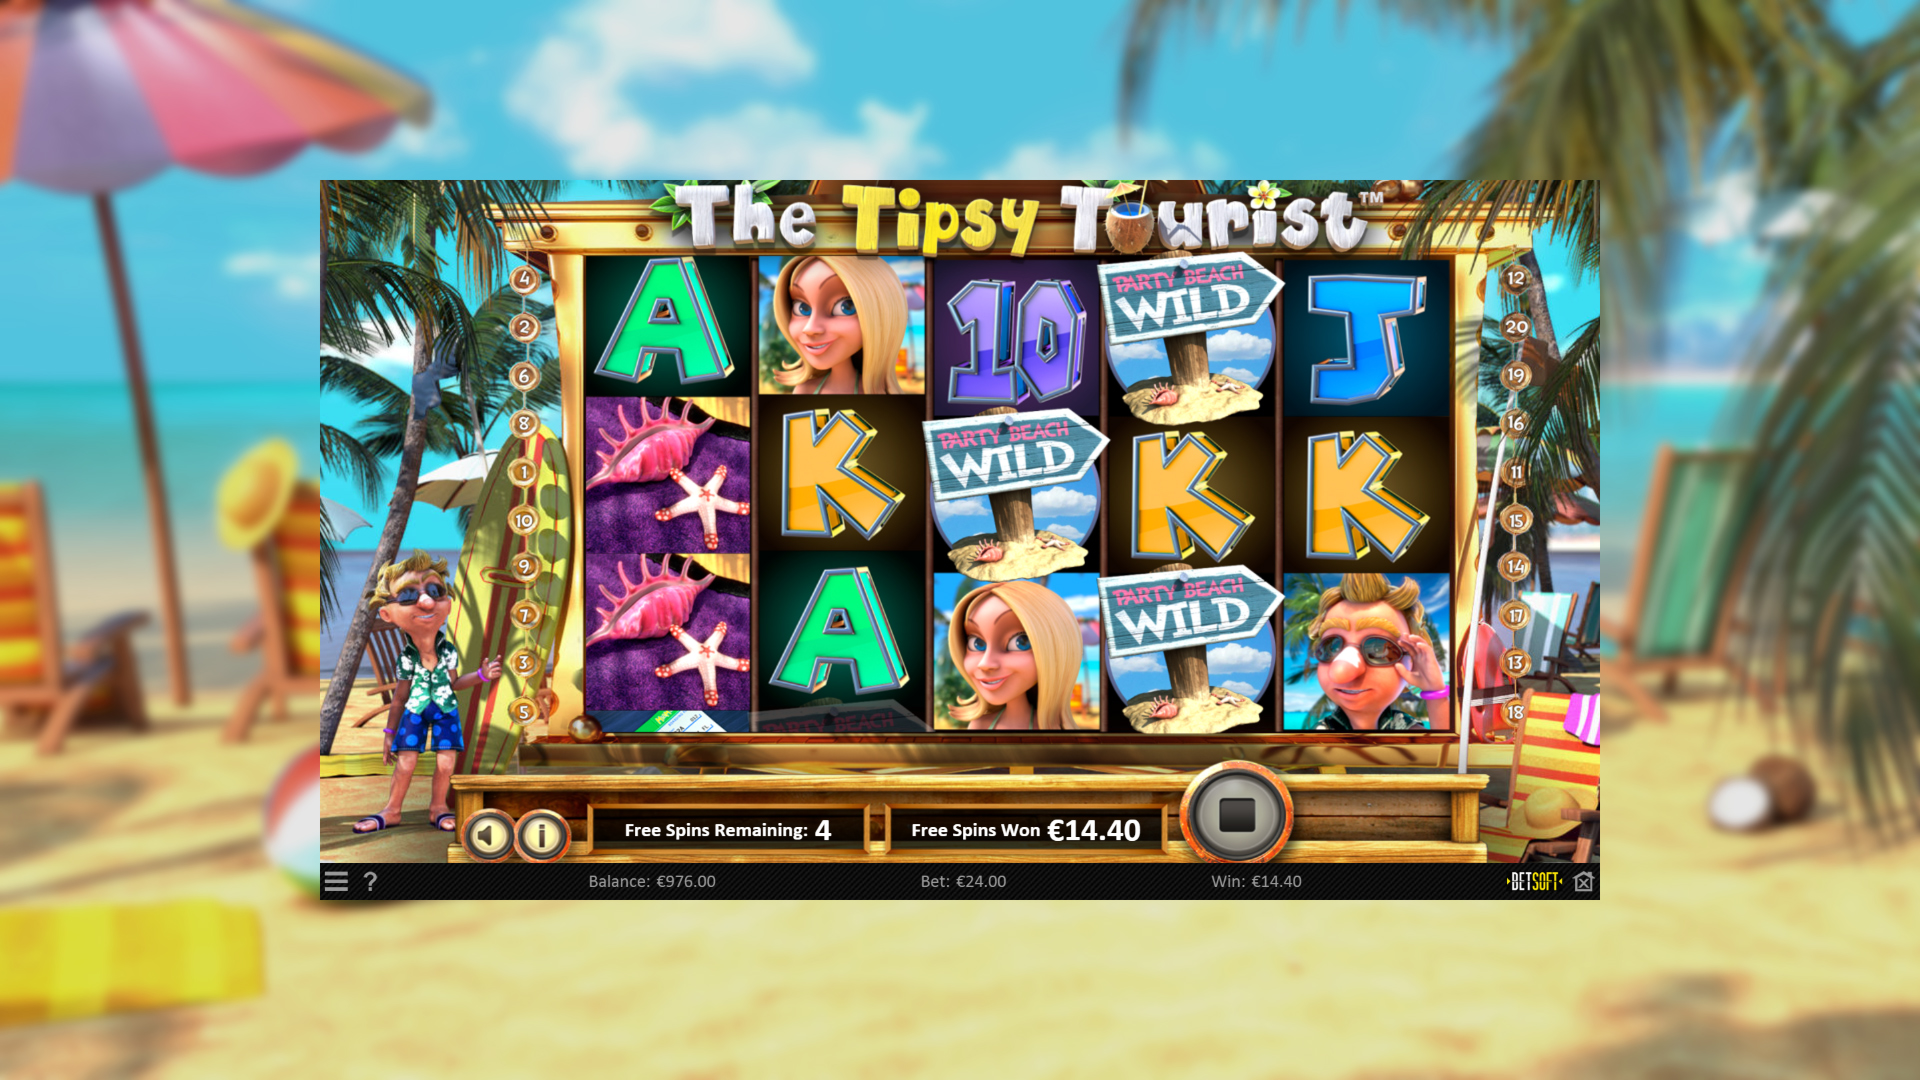 The Tipsy Tourist - Free Spins